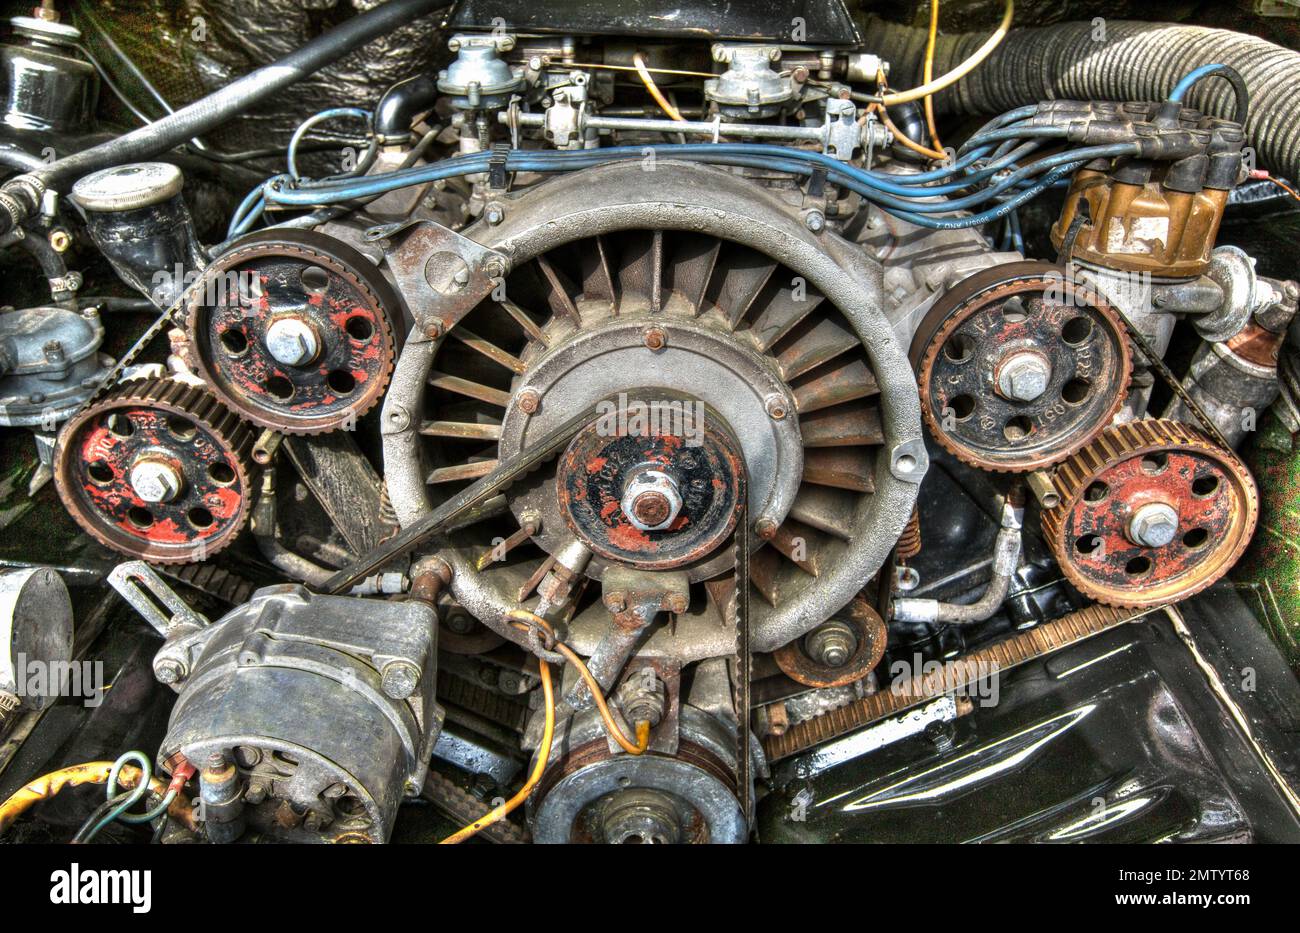 Detail of the old combustion engine Stock Photo